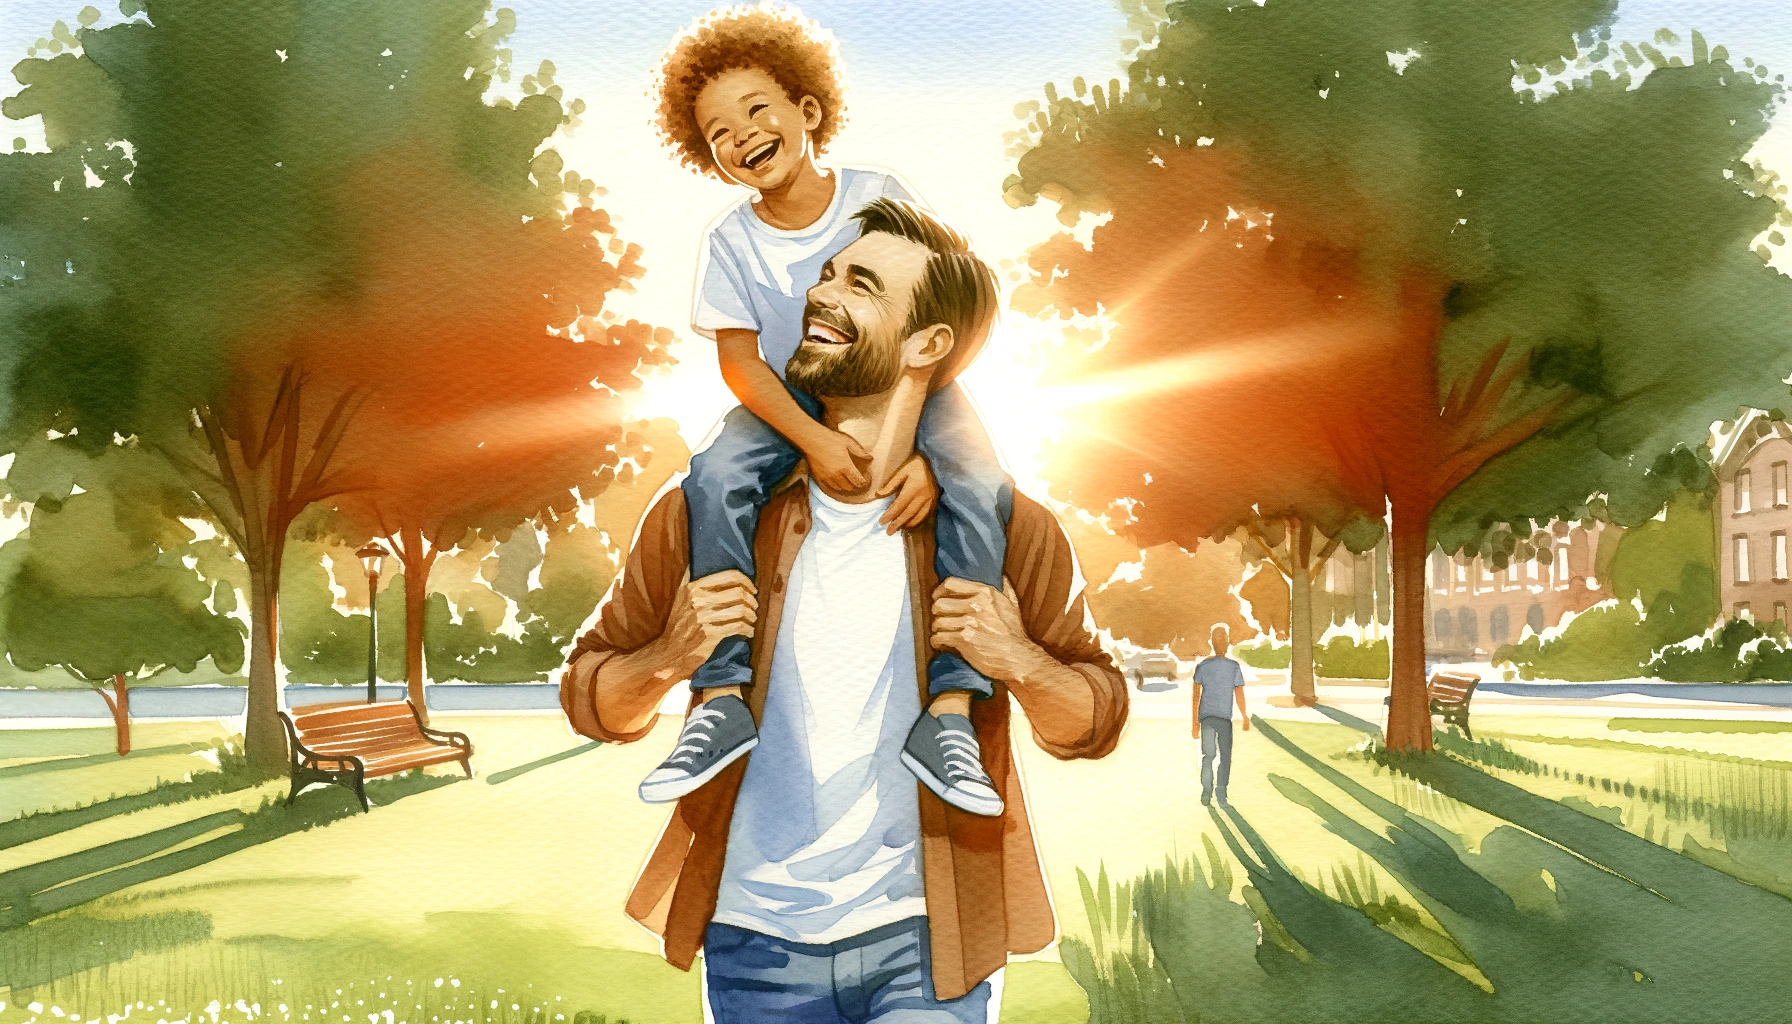 Christian father and son share laughter in a park. Dad carries son on shoulders, underlining their joyful and strong bond.